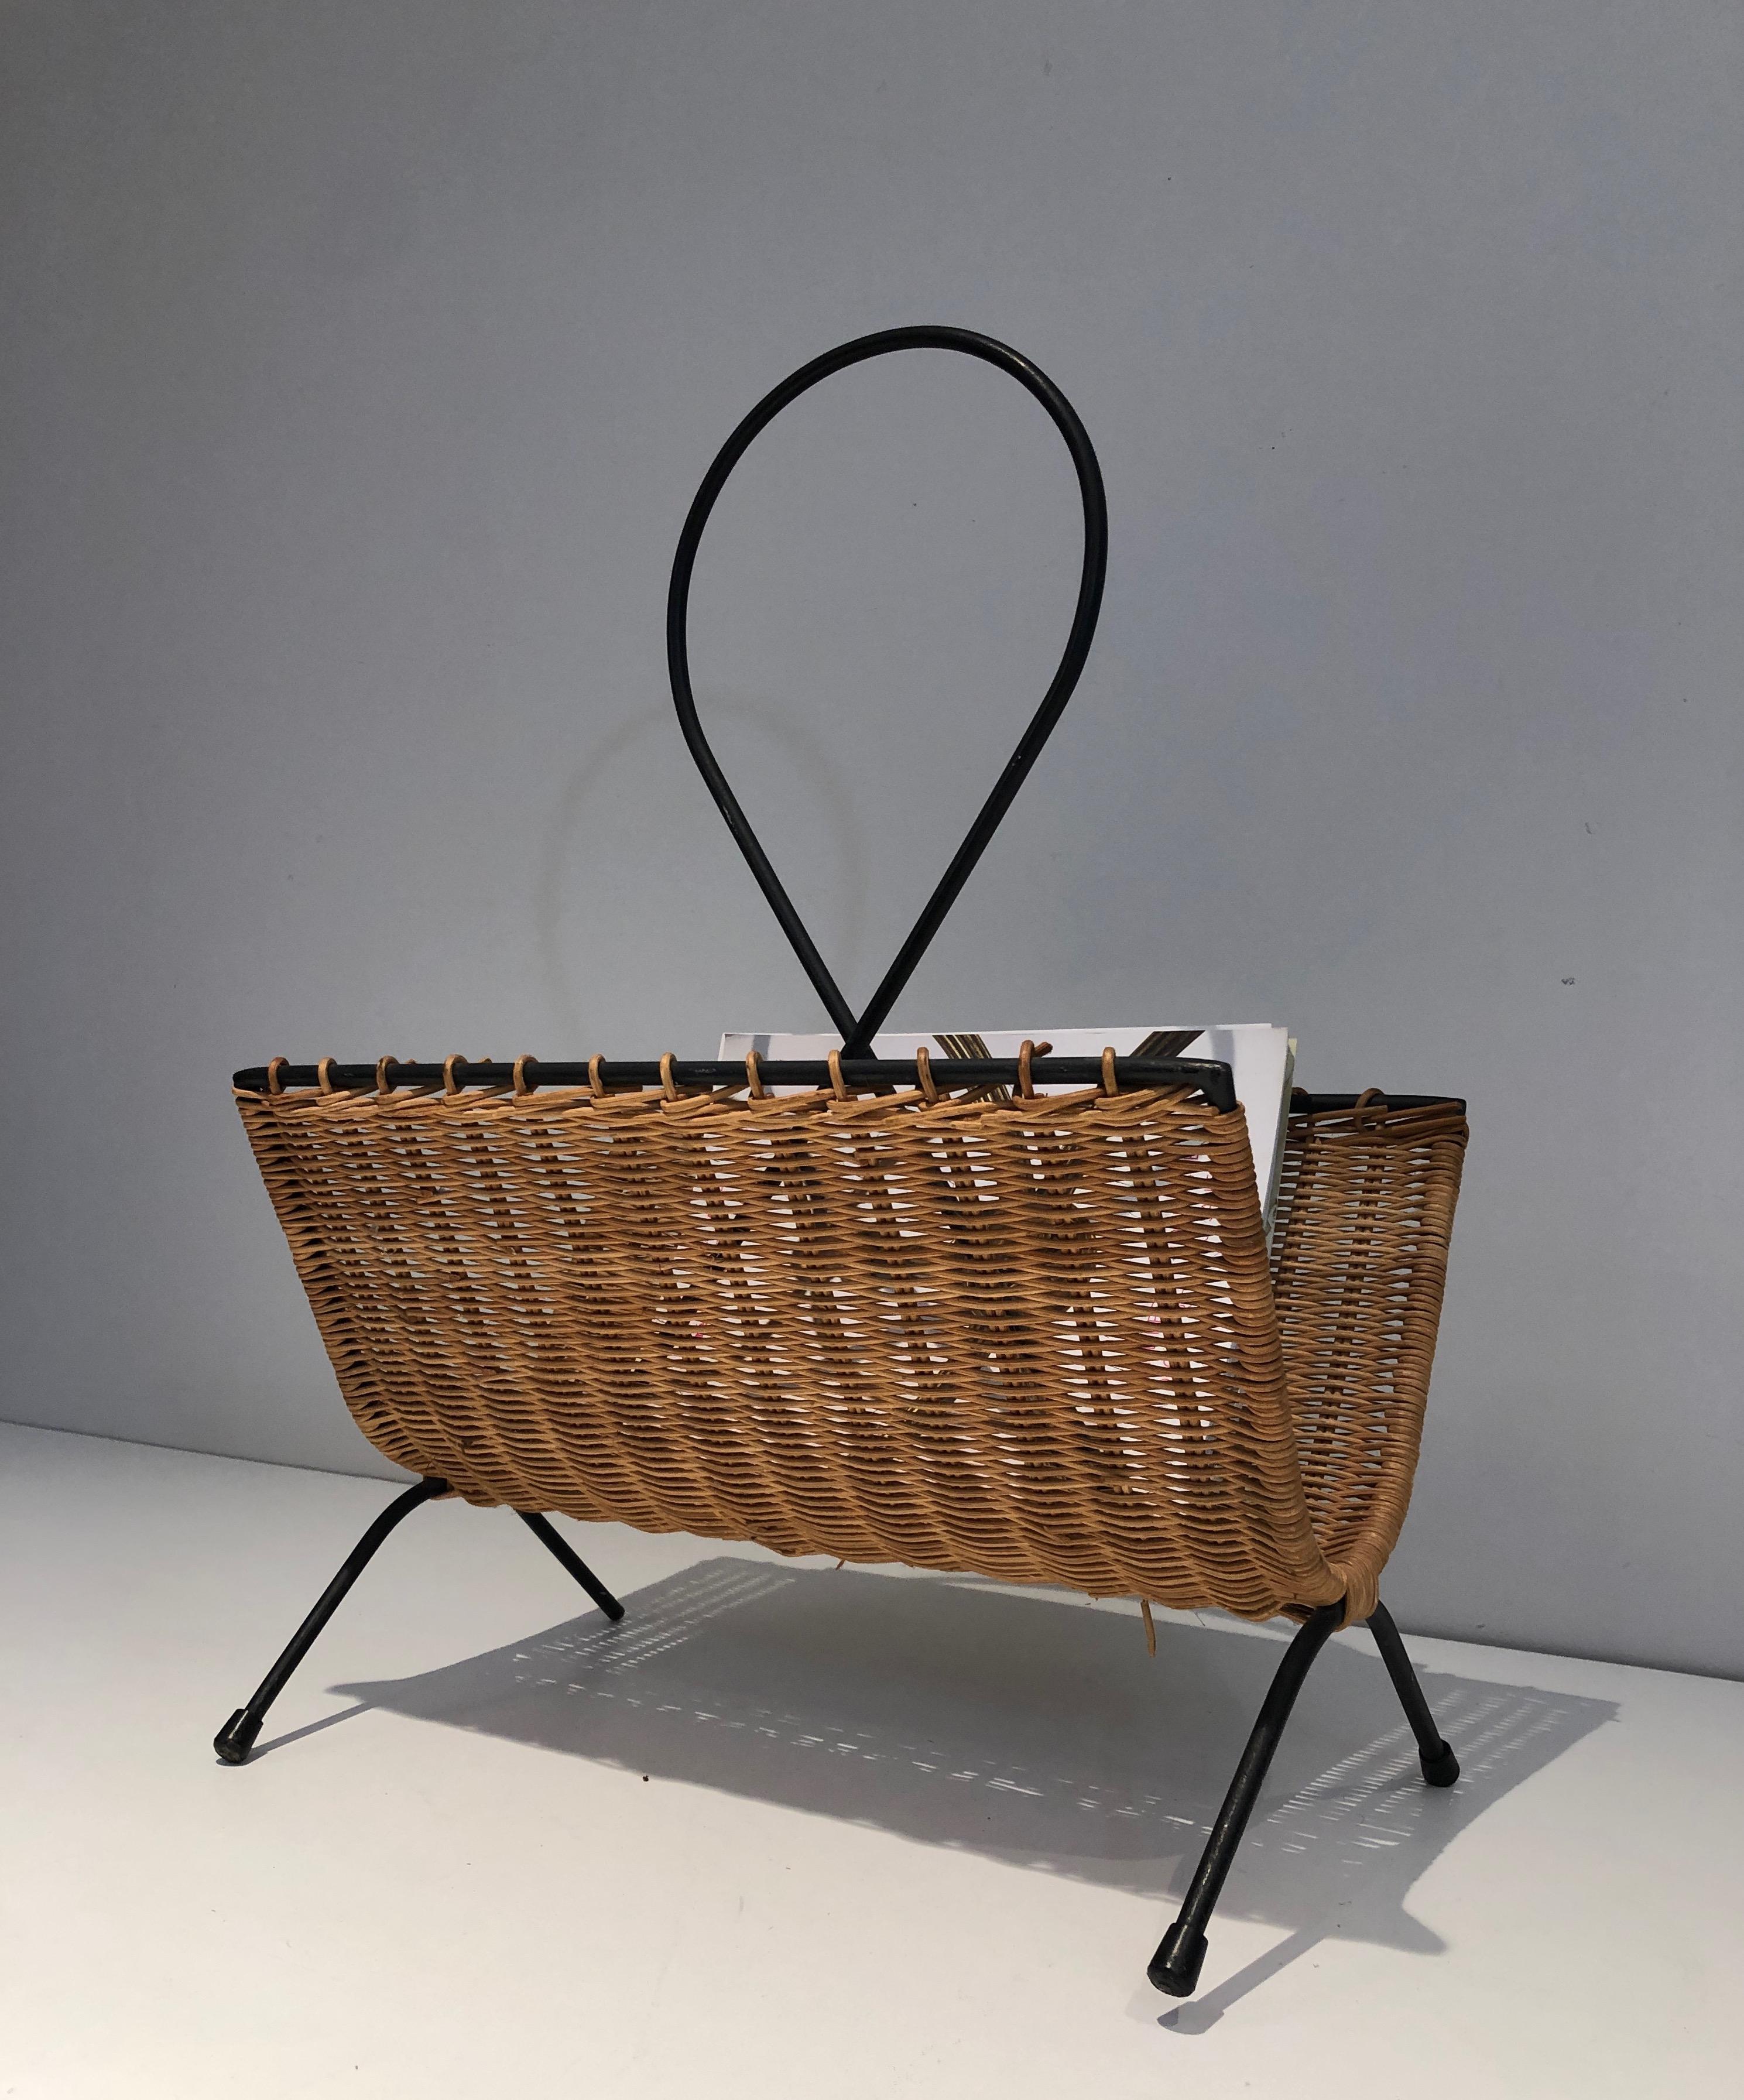 Mid-20th Century Black Lacquered Metal Magazine Rack, French Work, Circa 1950 For Sale